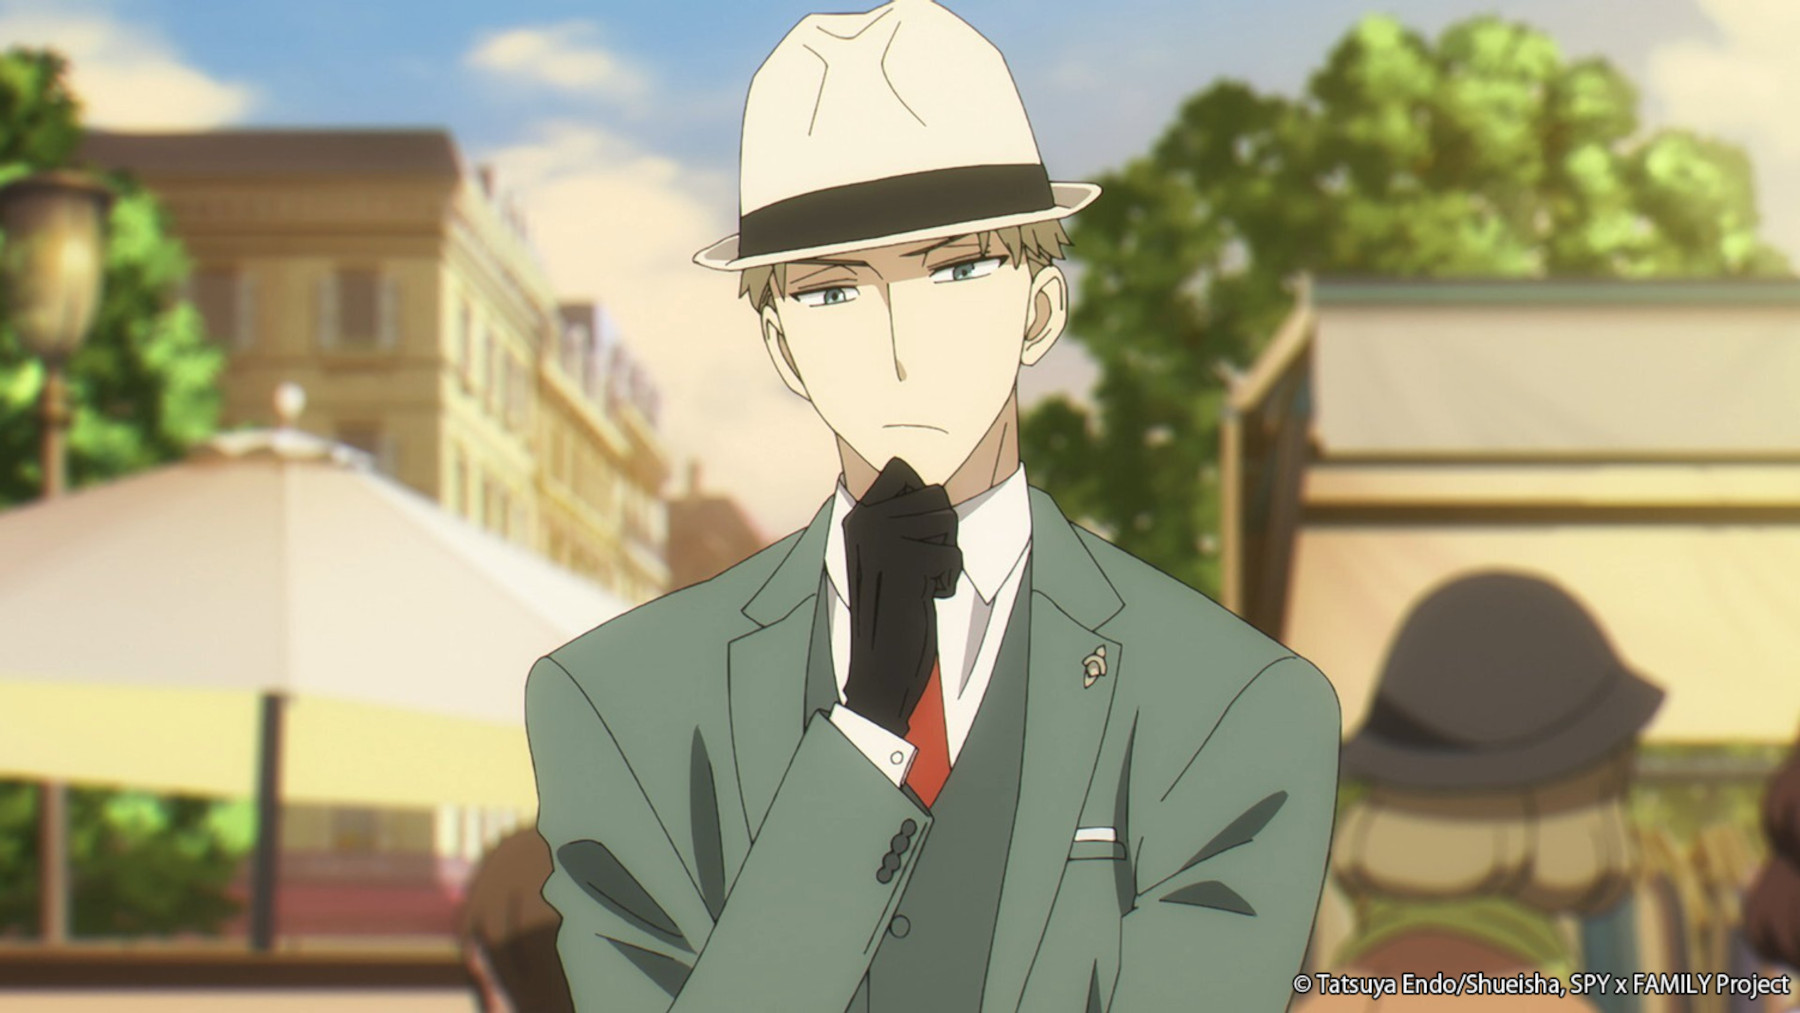 Twilight in 'Spy x Family' for our preview of episode 21. He's wearing a green suit, red tie, and white hat.